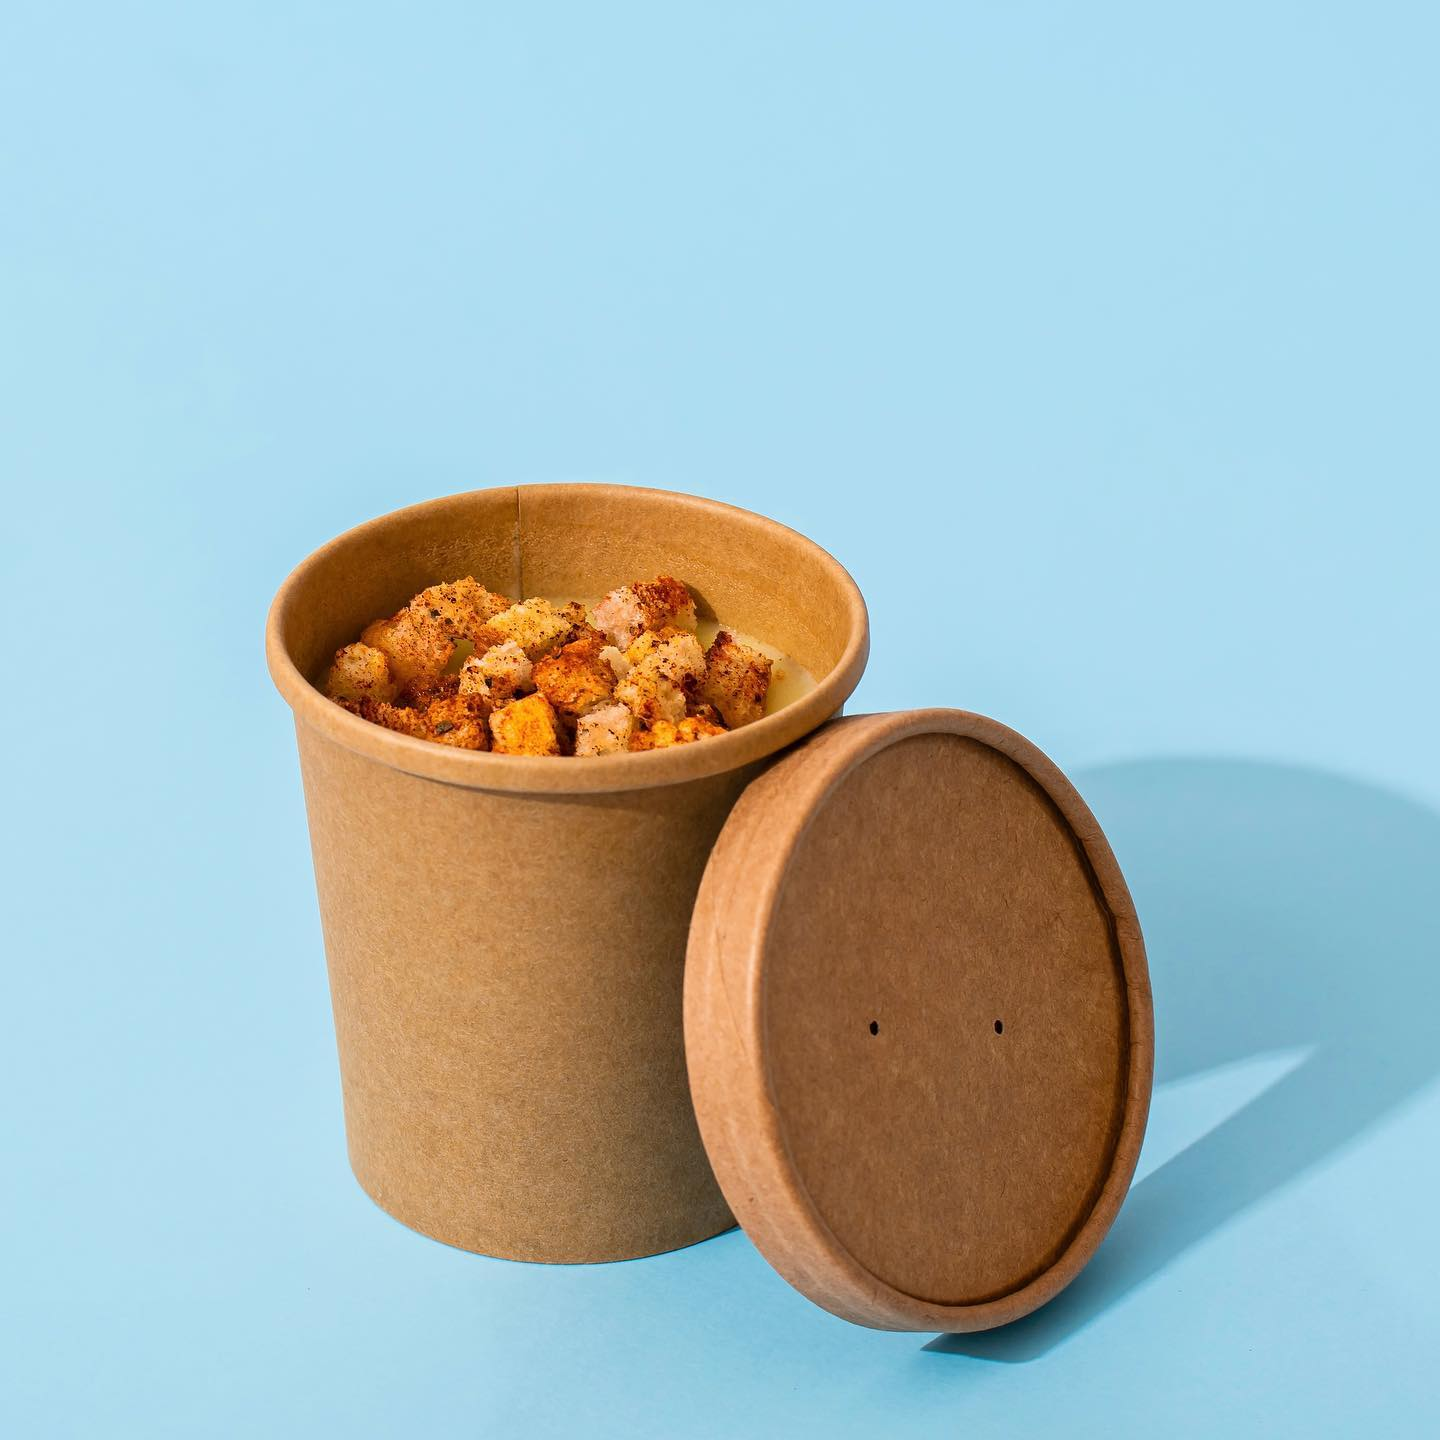 Kari-out paper container with croutons